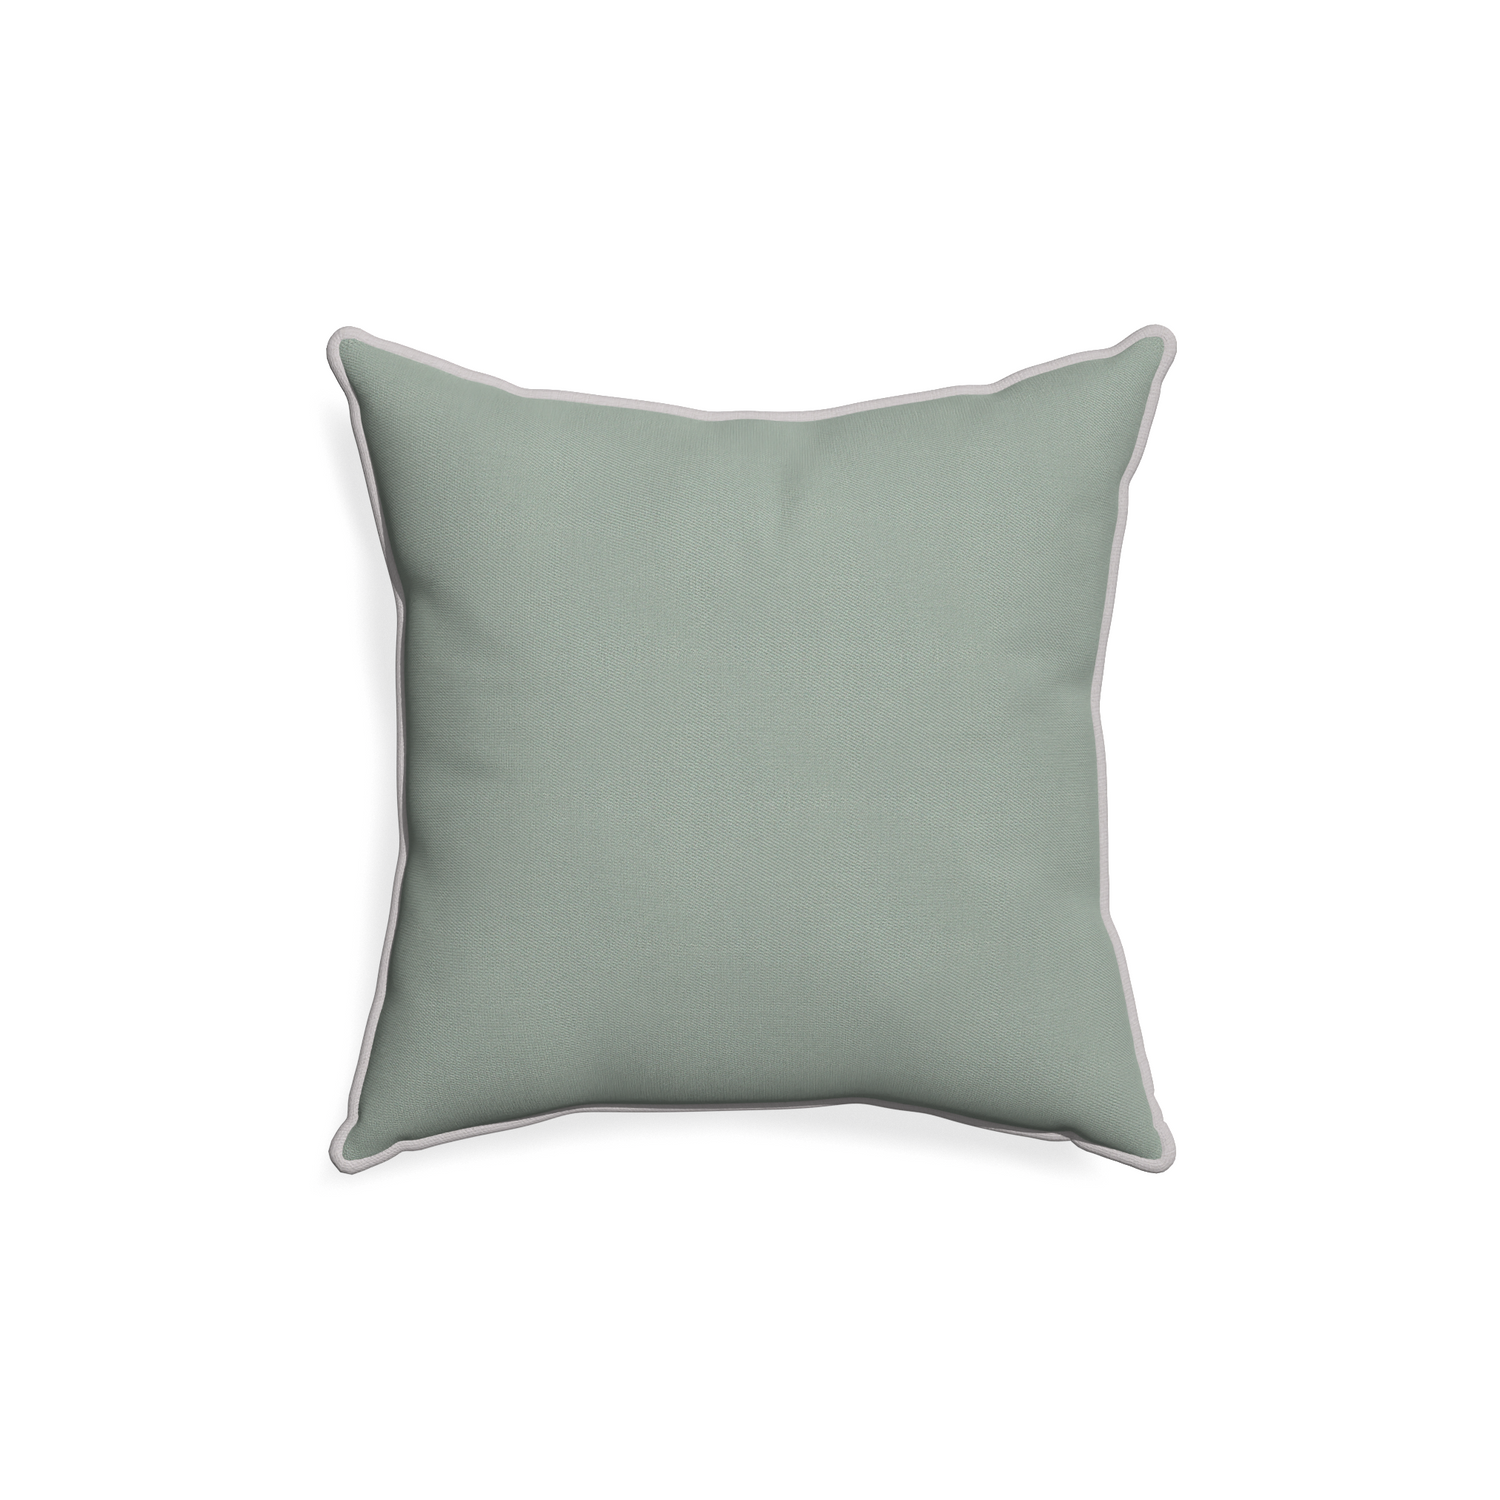 18-square sage custom sage green cottonpillow with pebble piping on white background